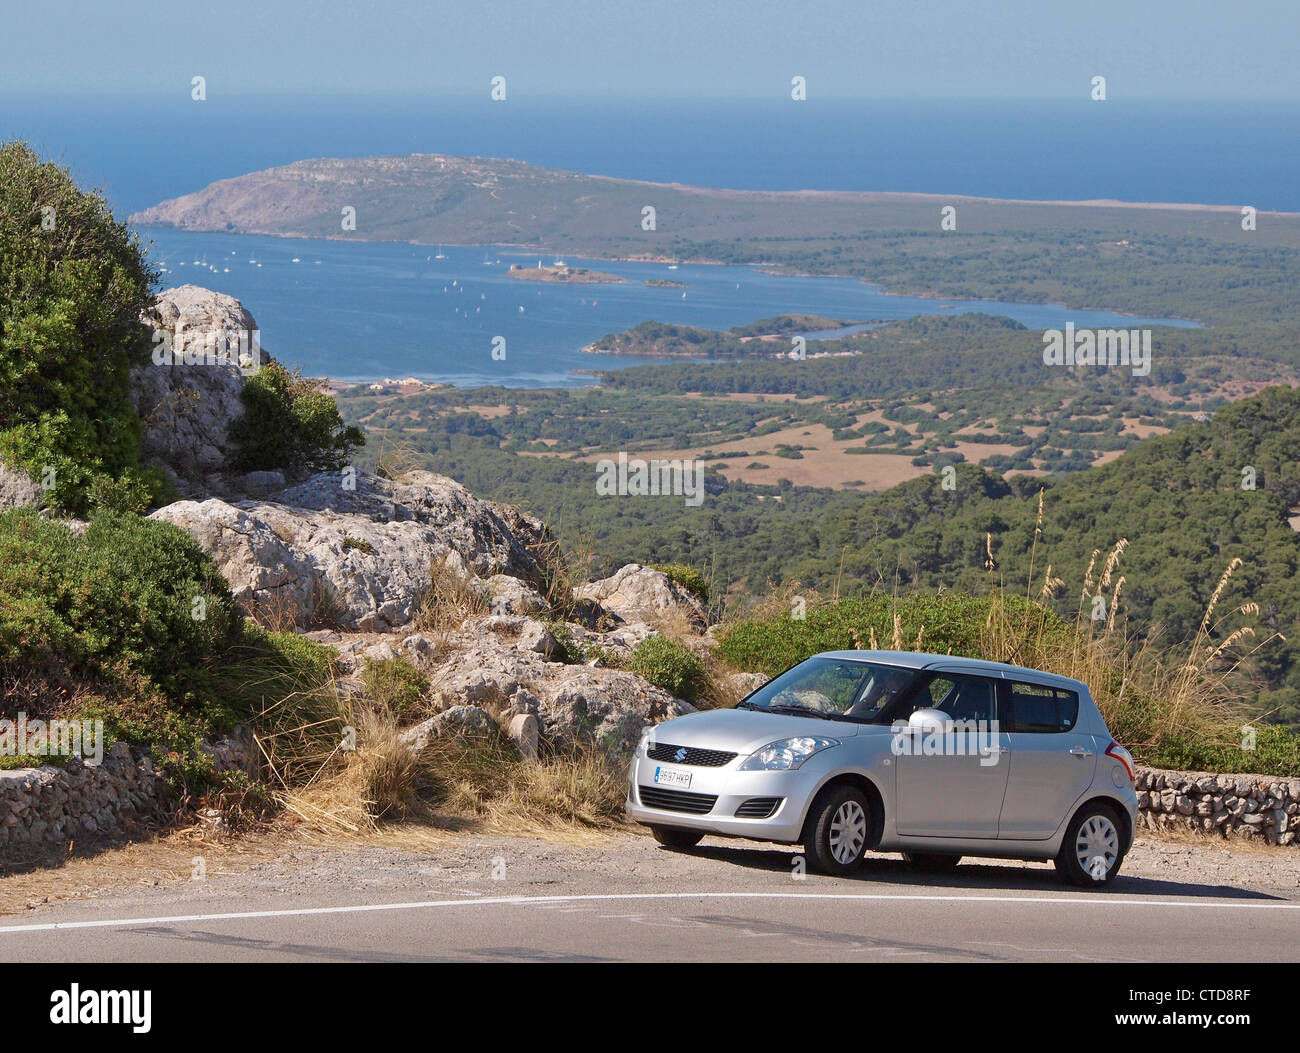 VIEW FROM MOUNT TORO OF FORNELLS WITH  SUZUKI HIRE CAR IN FORGROUND  MENORCA SPAIN Stock Photo